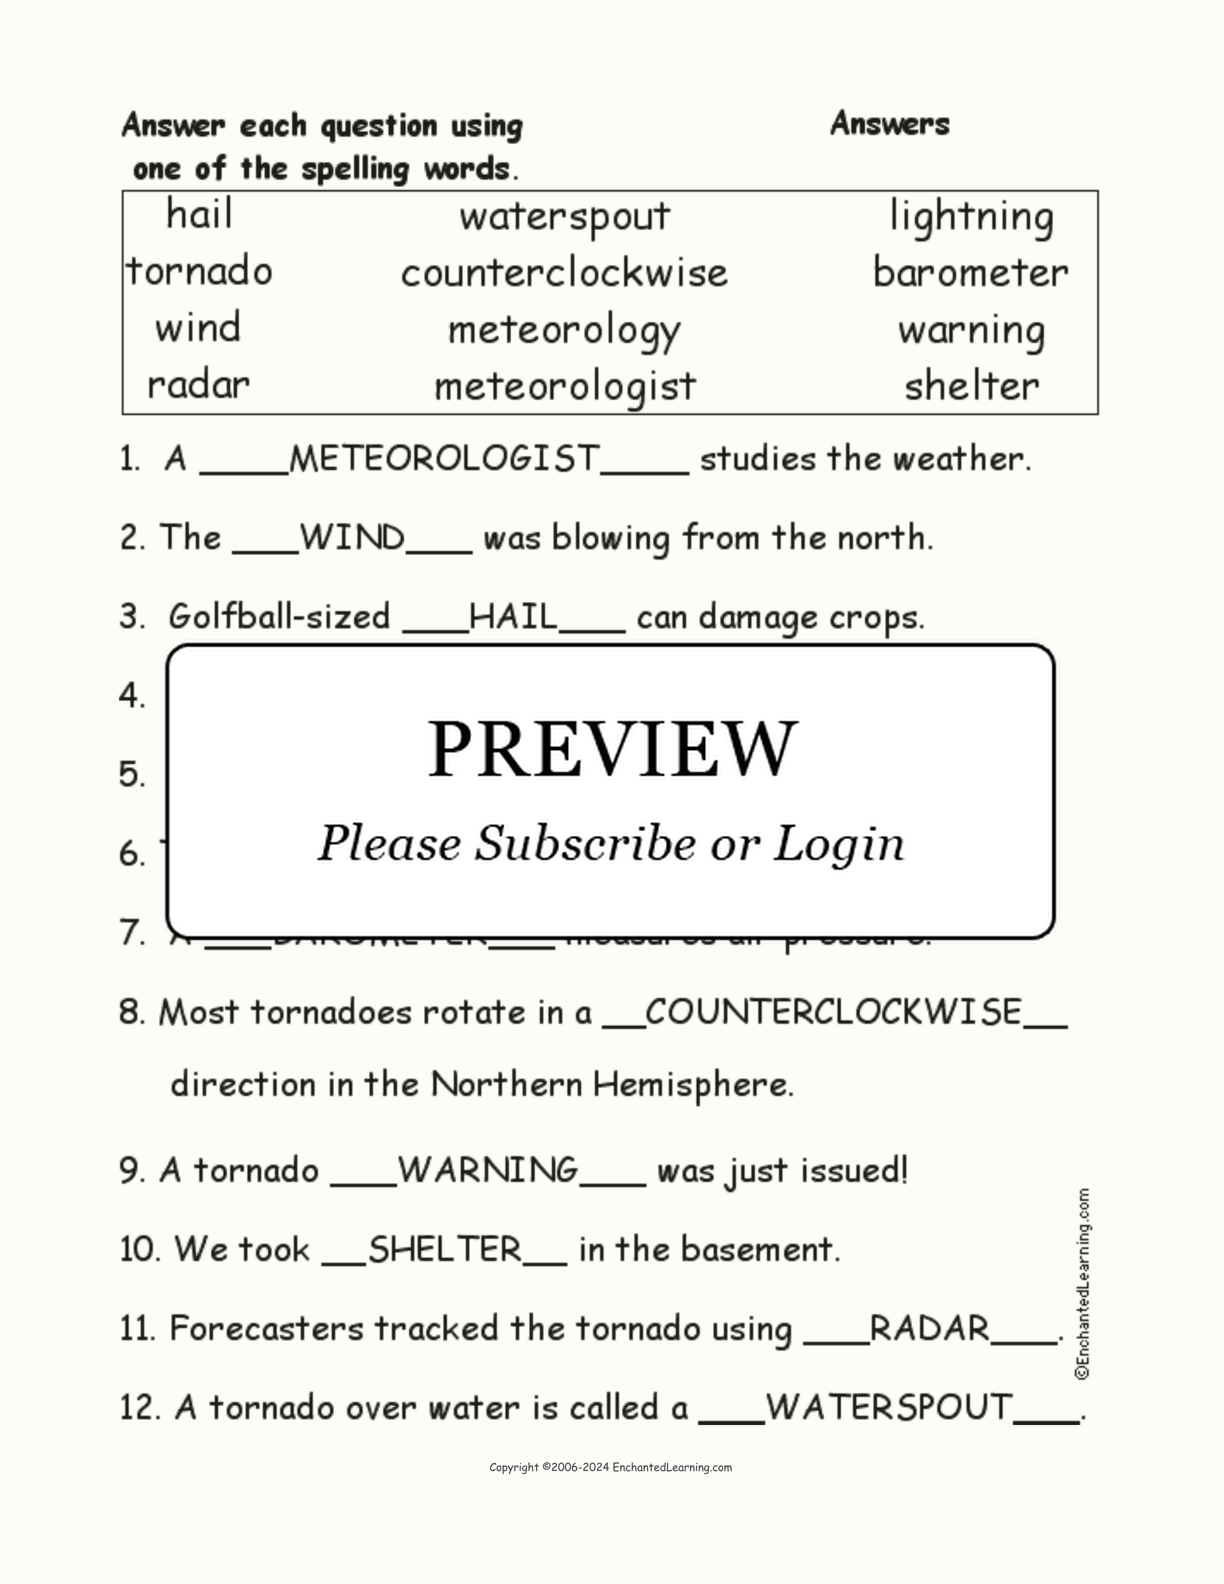 Tornado Spelling Word Questions interactive worksheet page 2